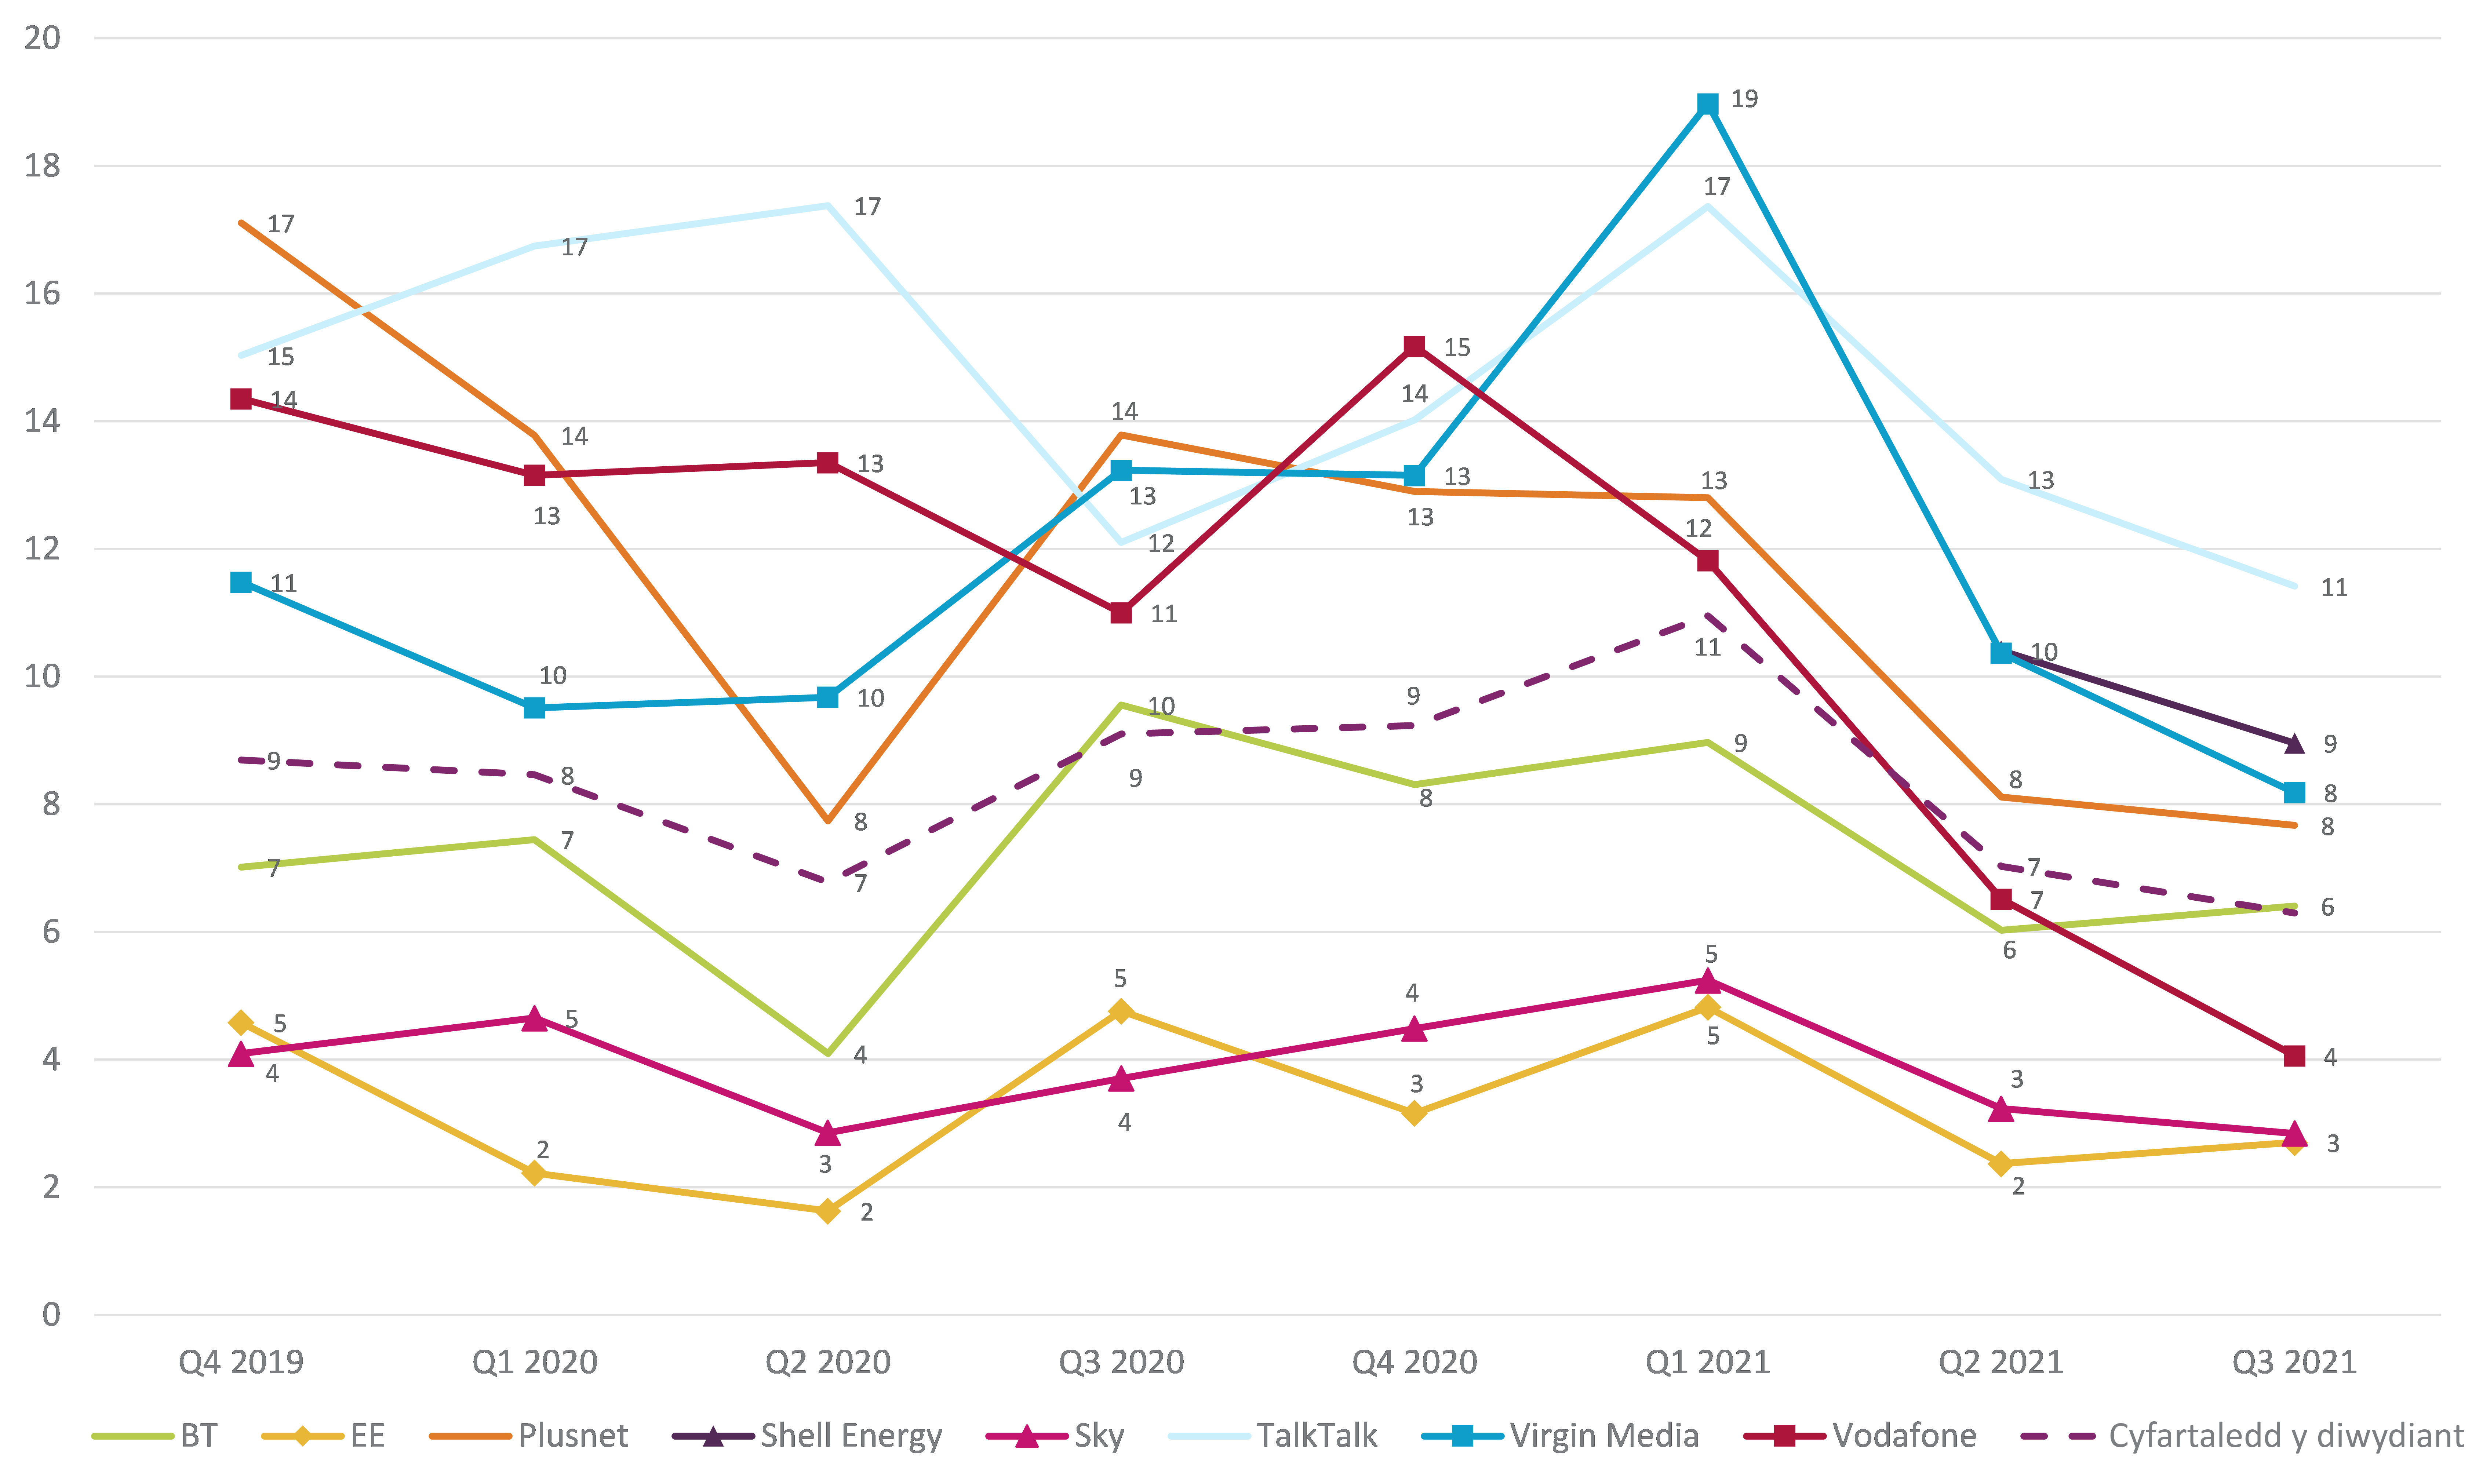 Graph showing trend data on residential consumer complaints received by Ofcom across landline by communications provider. It shows the landline complaints per 100,000 subscribers for the Q4 2019 – Q3 2021 period. TalkTalk generated the highest volume of landline complaints (at 11) in Q3 2021 followed by Shell Energy at 9. EE and Sky generated the lowest volume of landline complaints at 3.